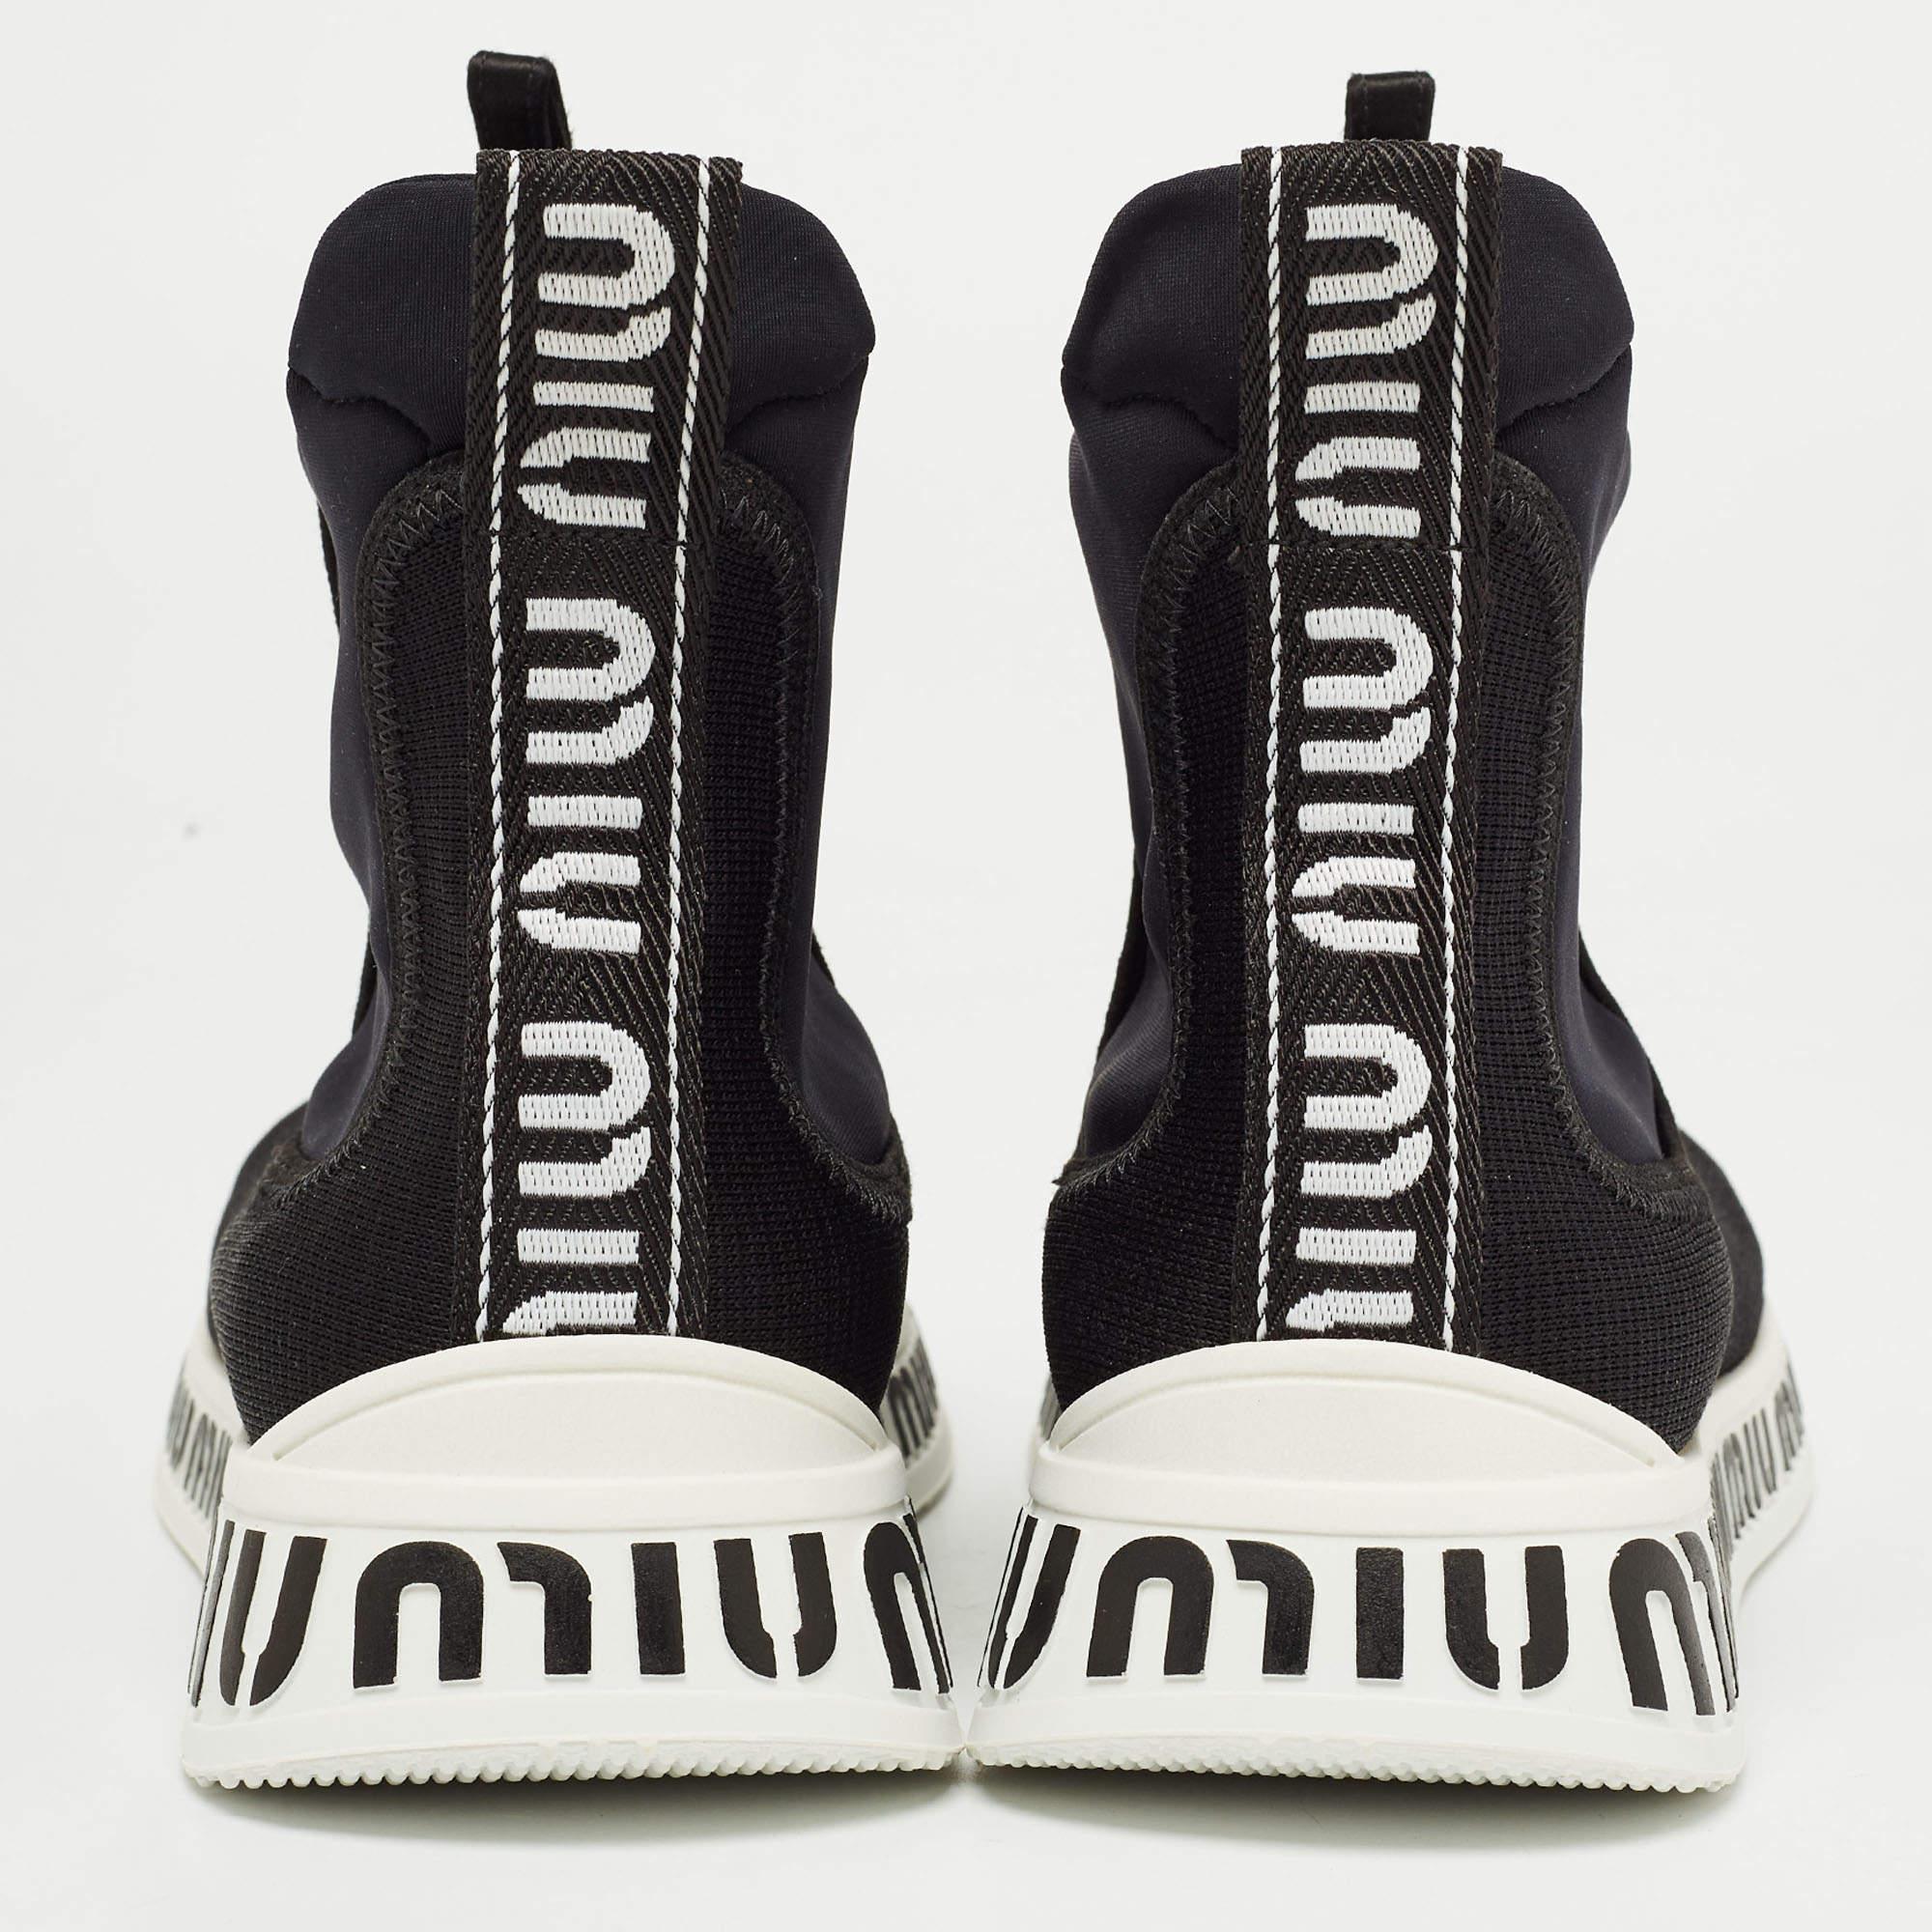 Miu Miu Black Knit Fabric and Neoprene High Top Sneakers Size 35 For Sale 1